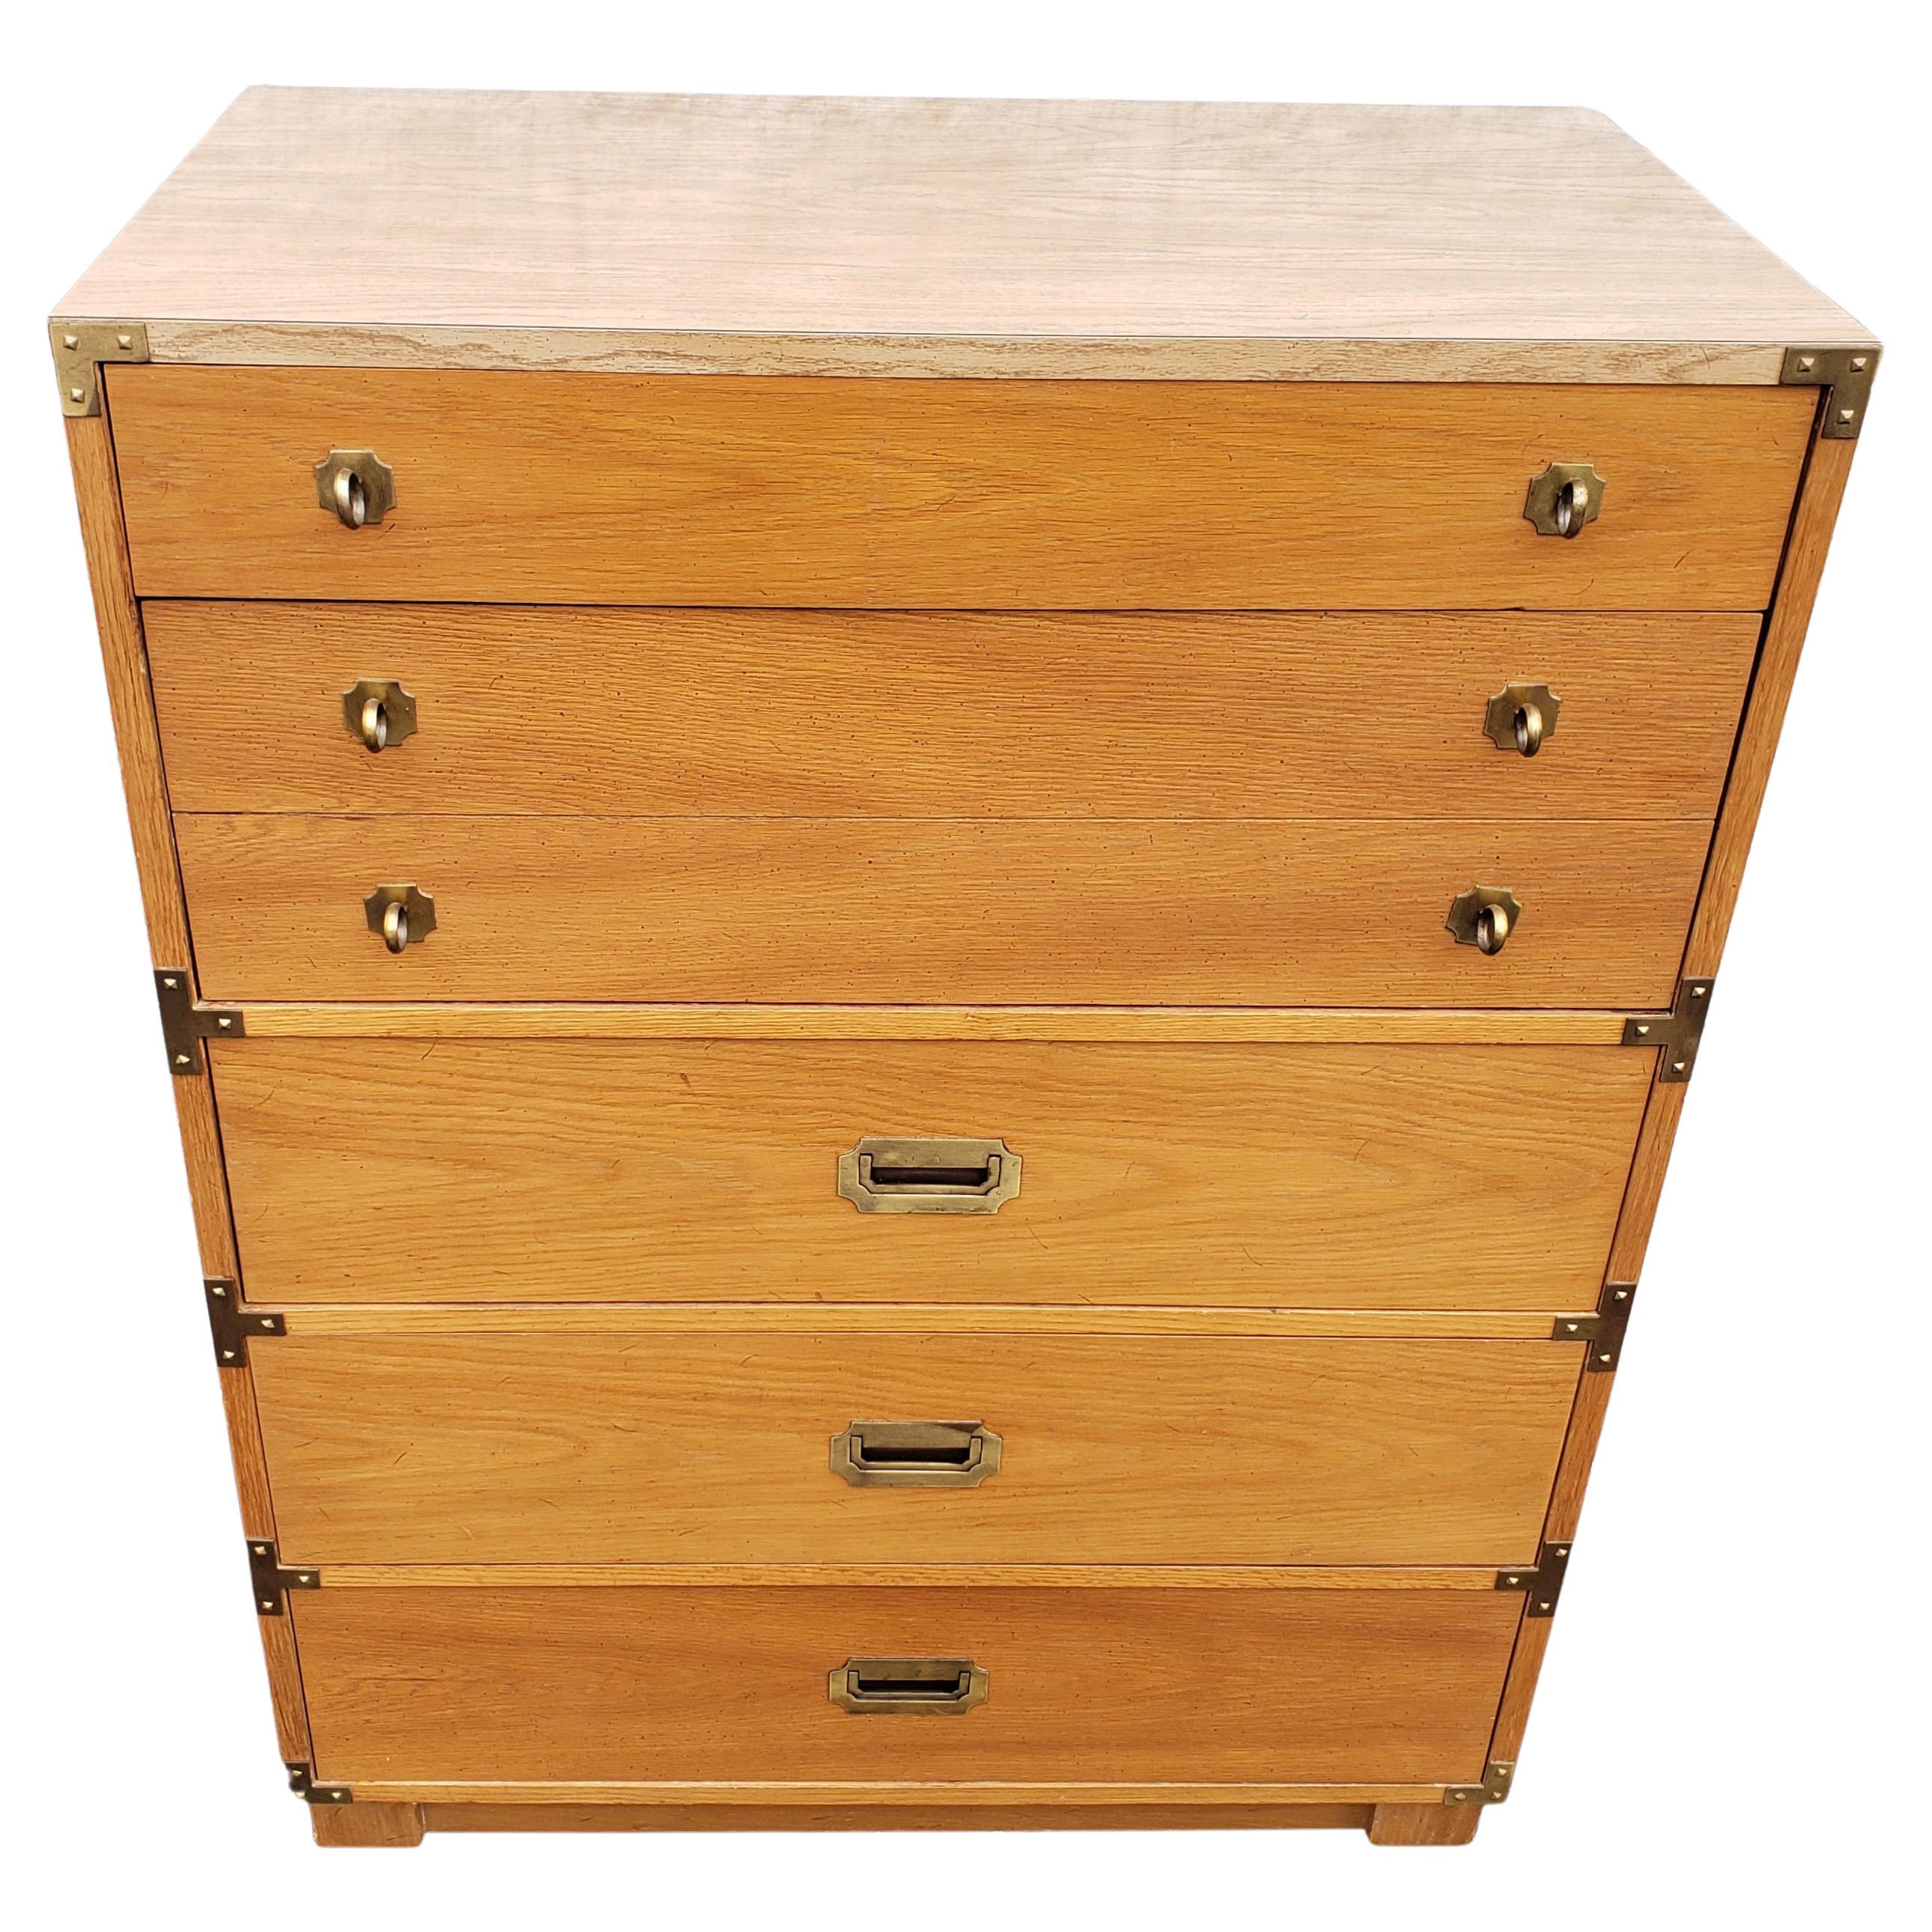 Drexel Campaign Chest of Drawers / Bachelor Chest, Circa 1960s